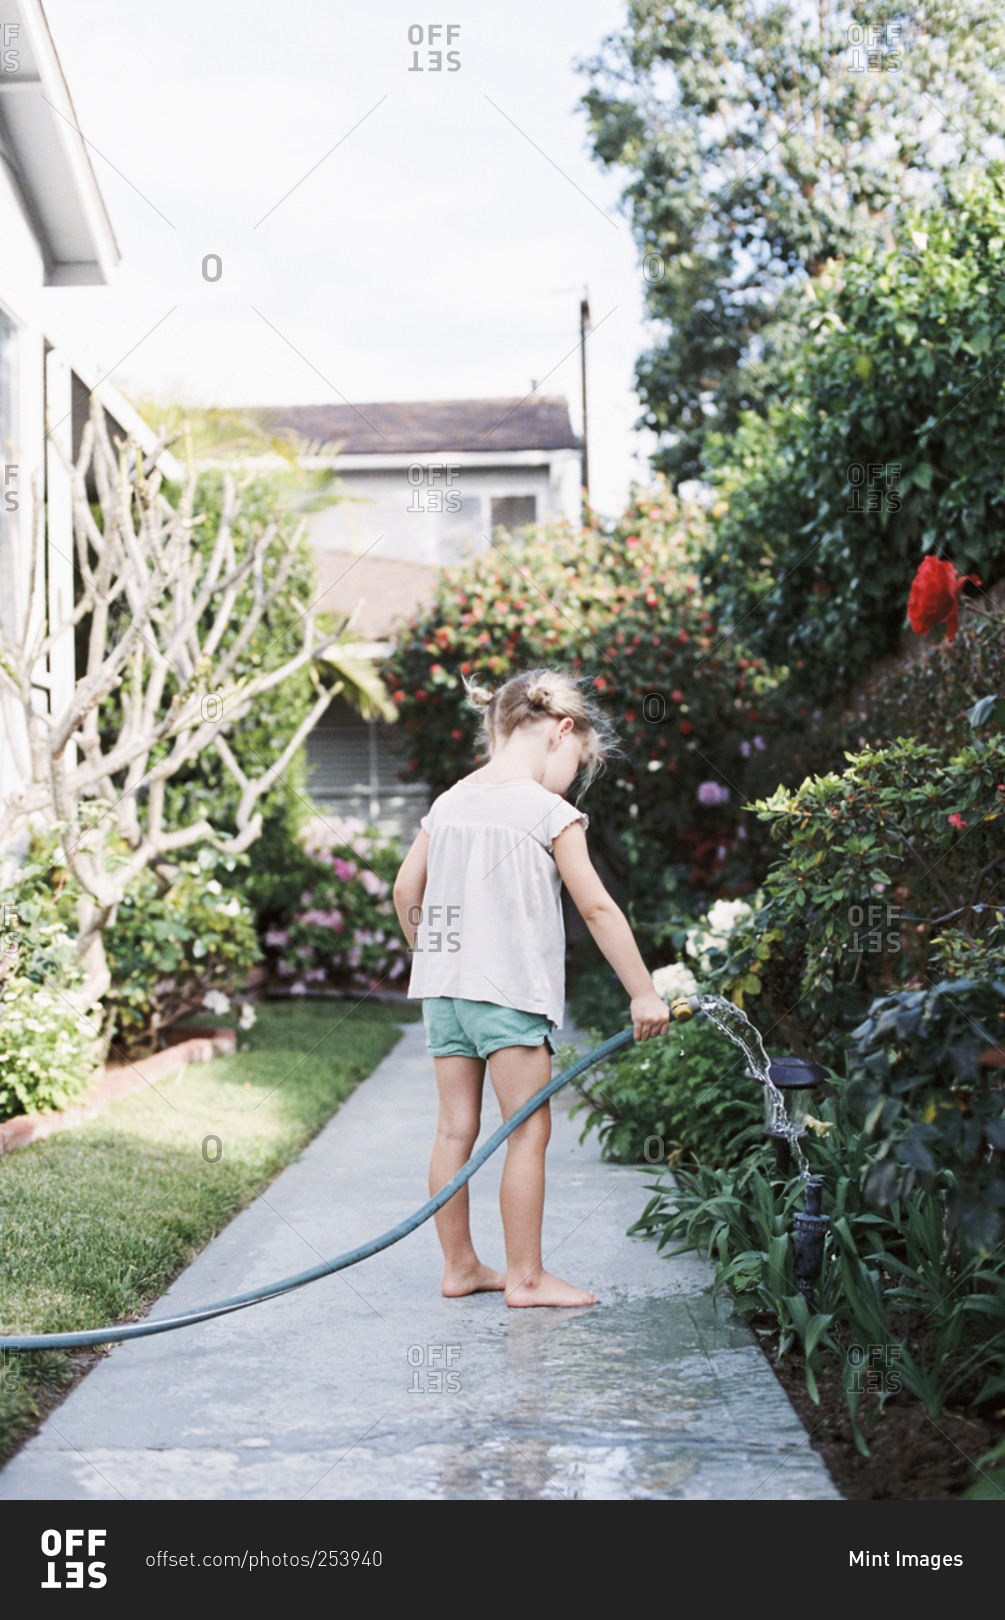 Young girl standing on a path in a garden, playing with a water hose